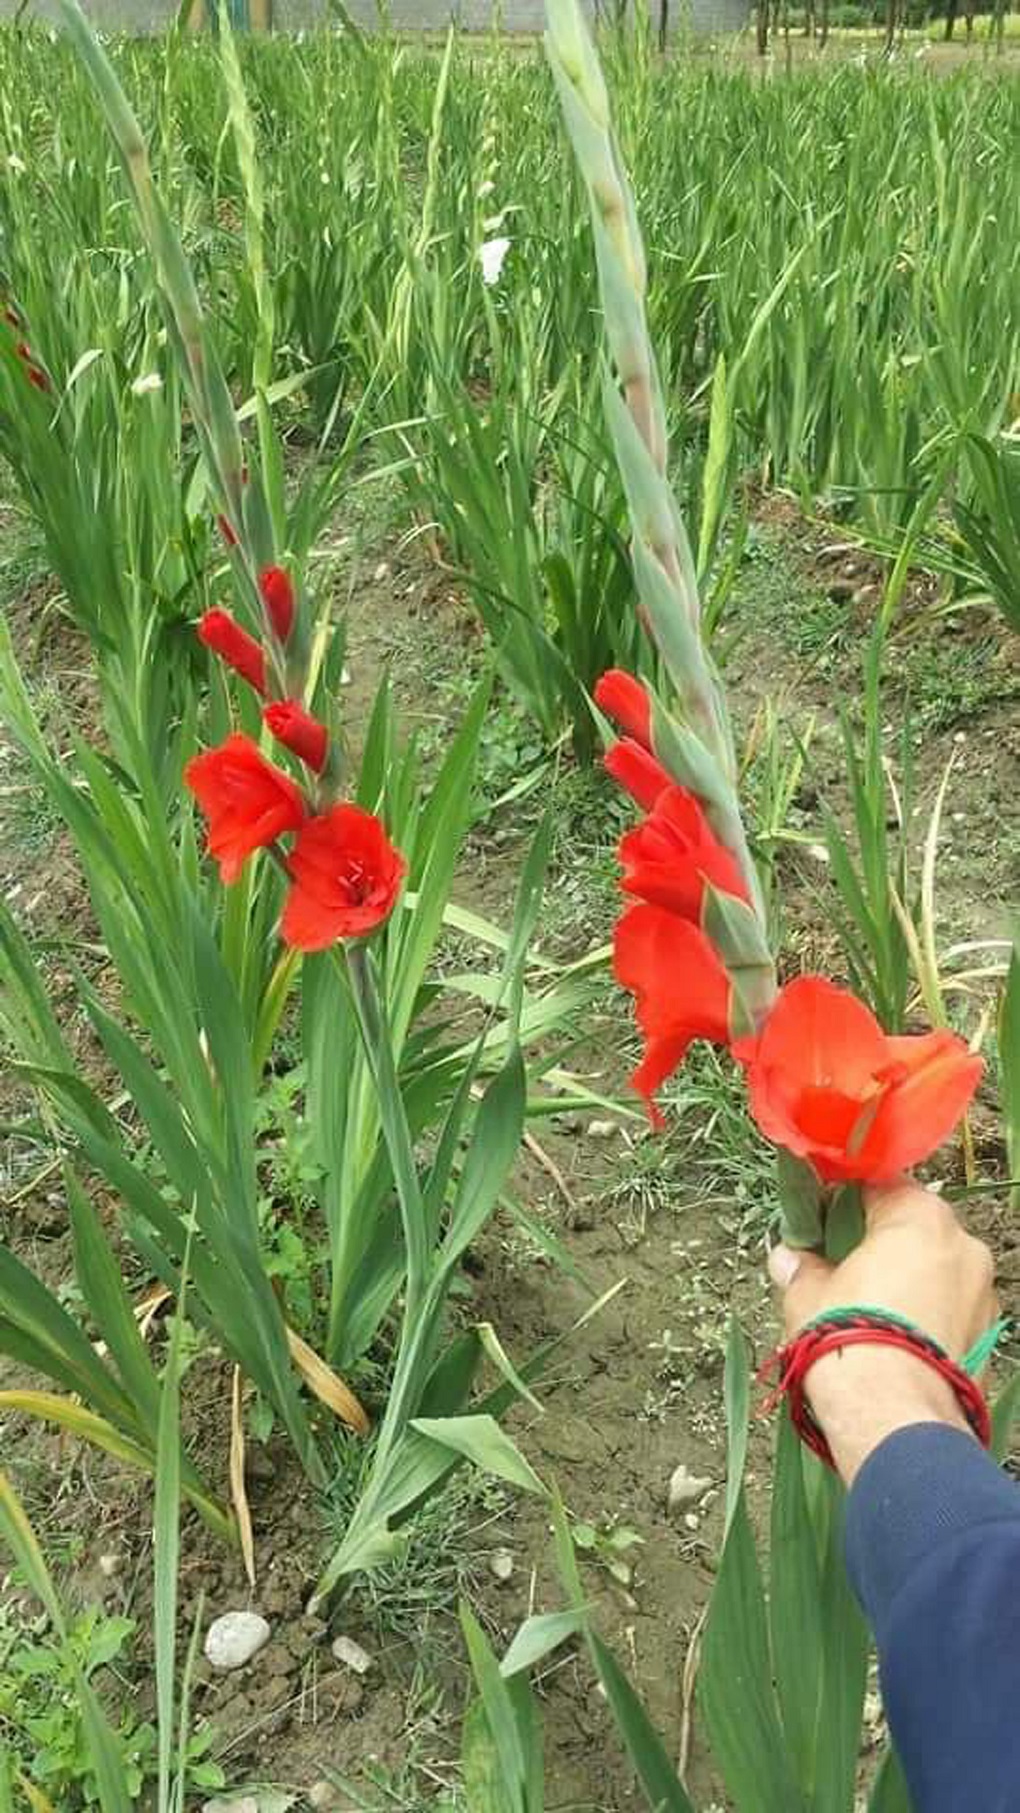 Gladiolus flower field near Shiger [image by: Ghulam Mohiuddin]